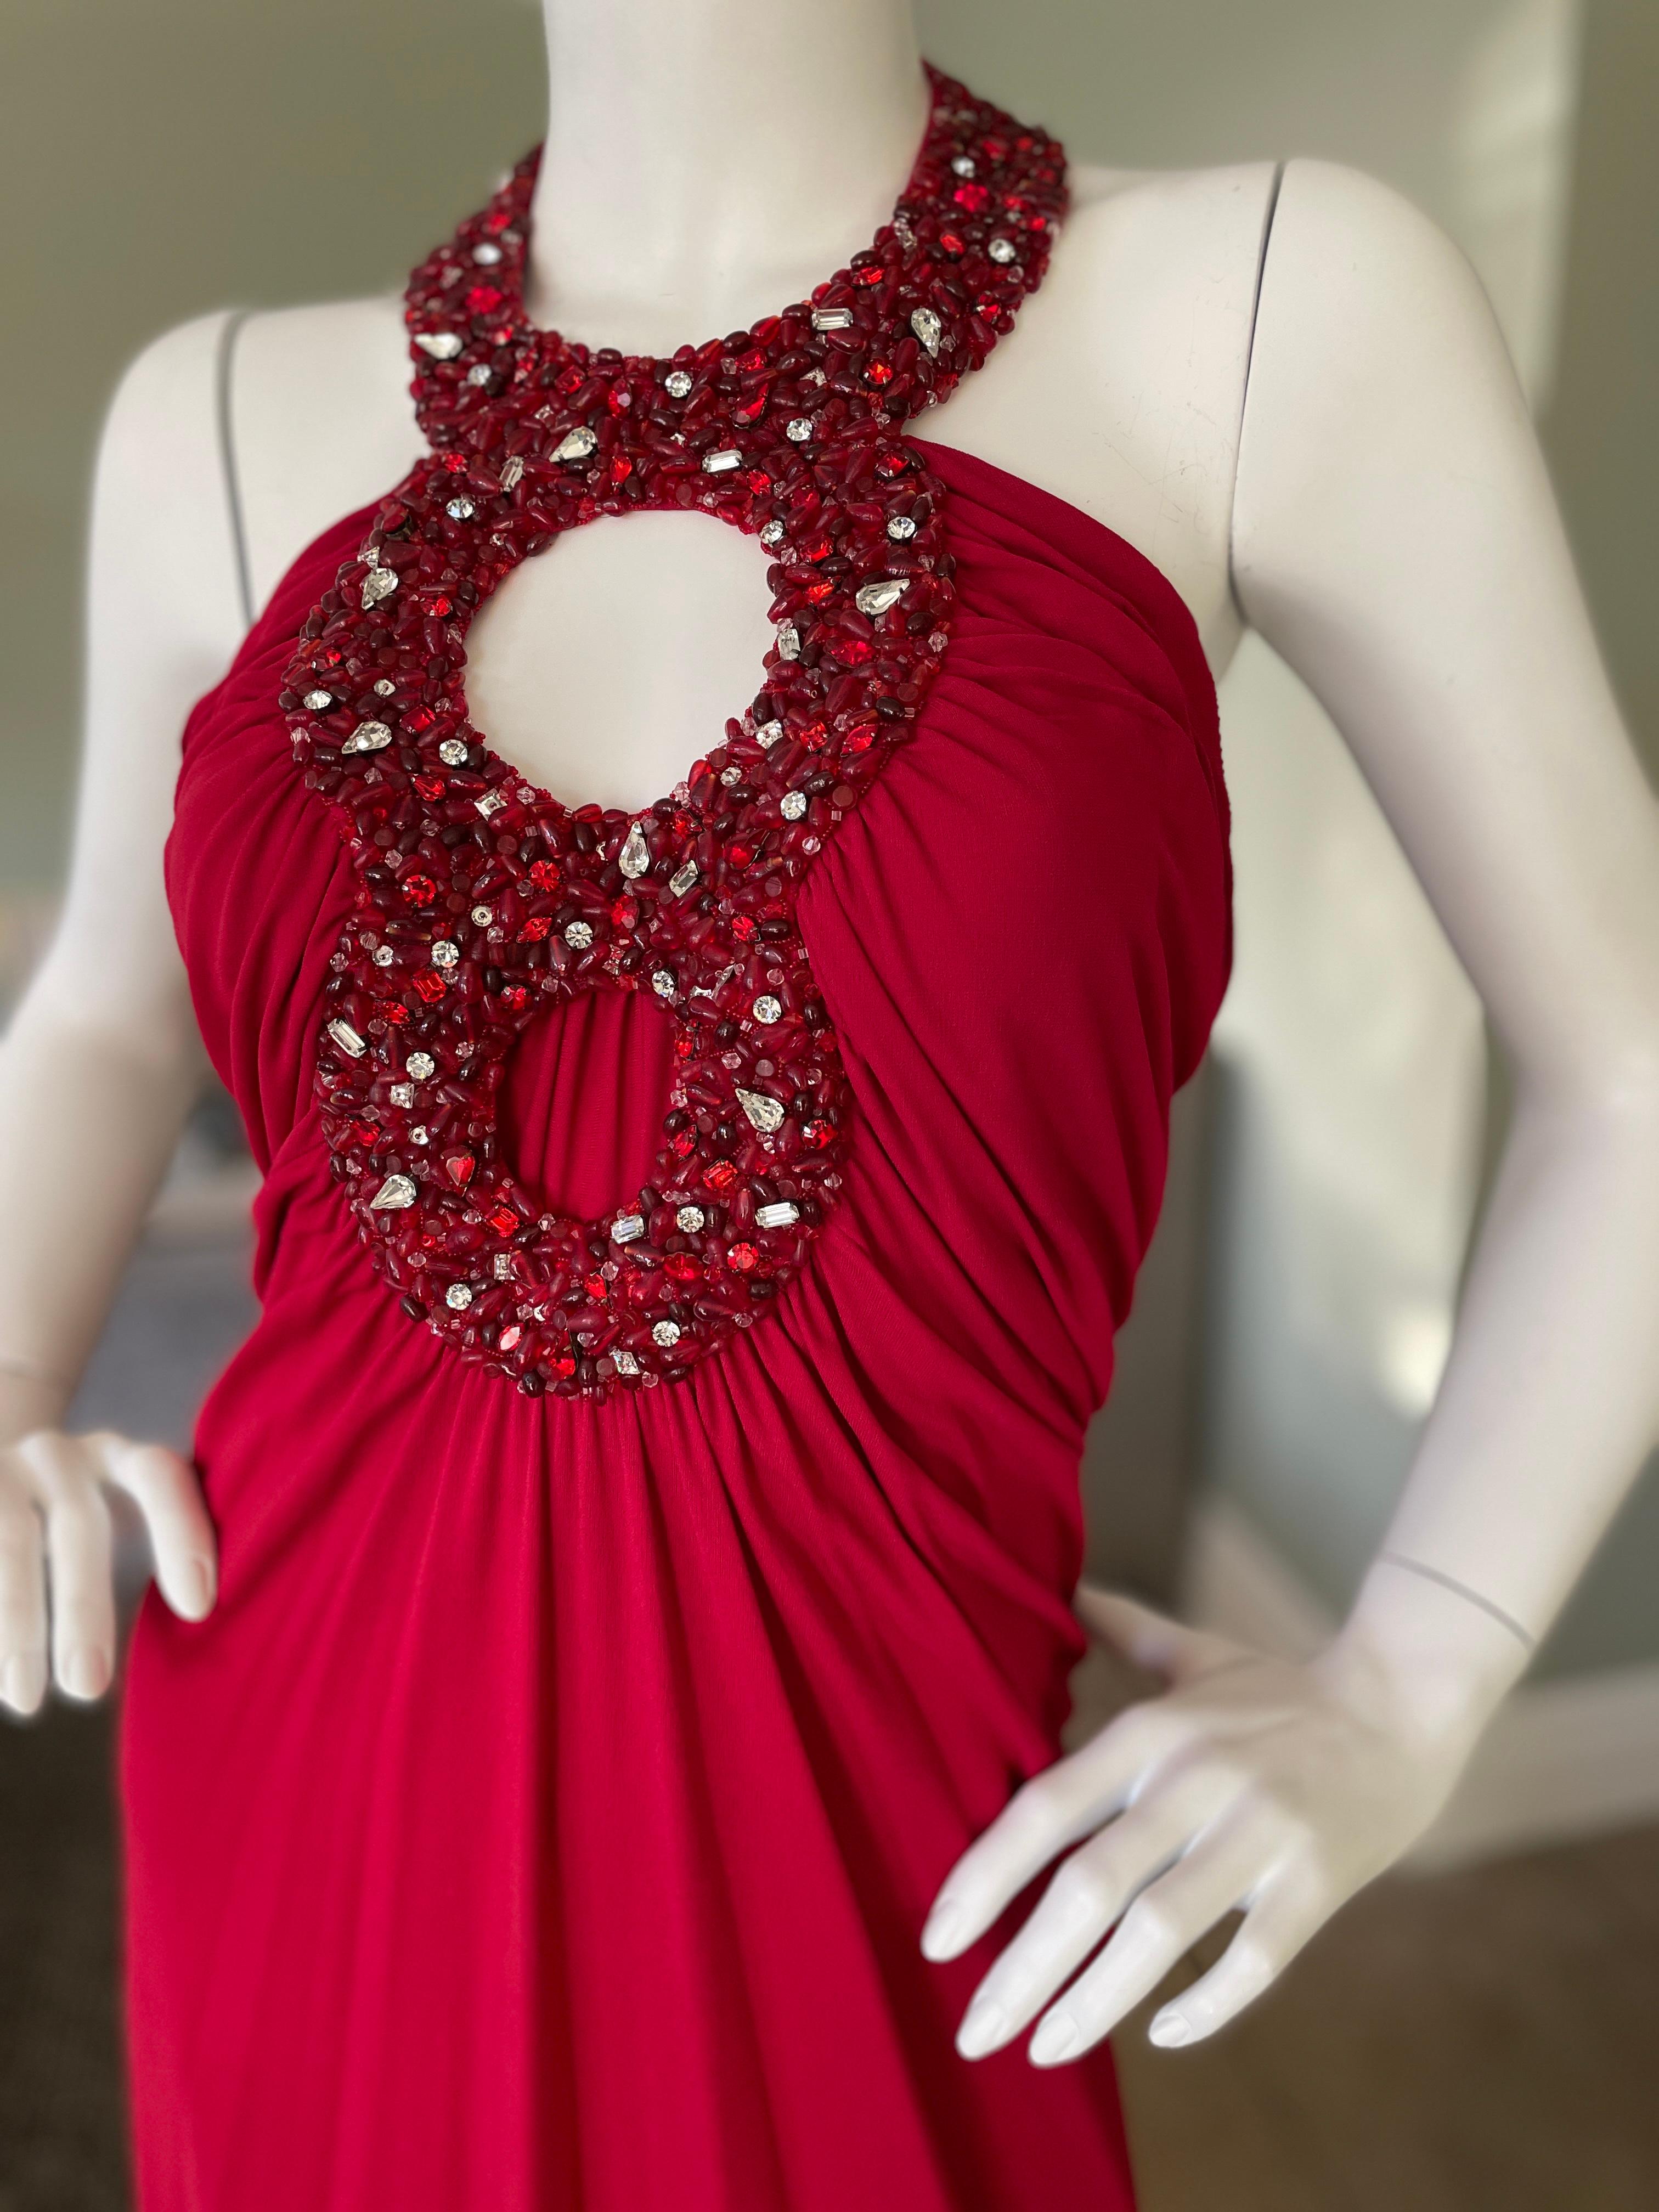 Azzaro Vintage Red Cocktail Dress with Jeweled Keyhole In Excellent Condition For Sale In Cloverdale, CA